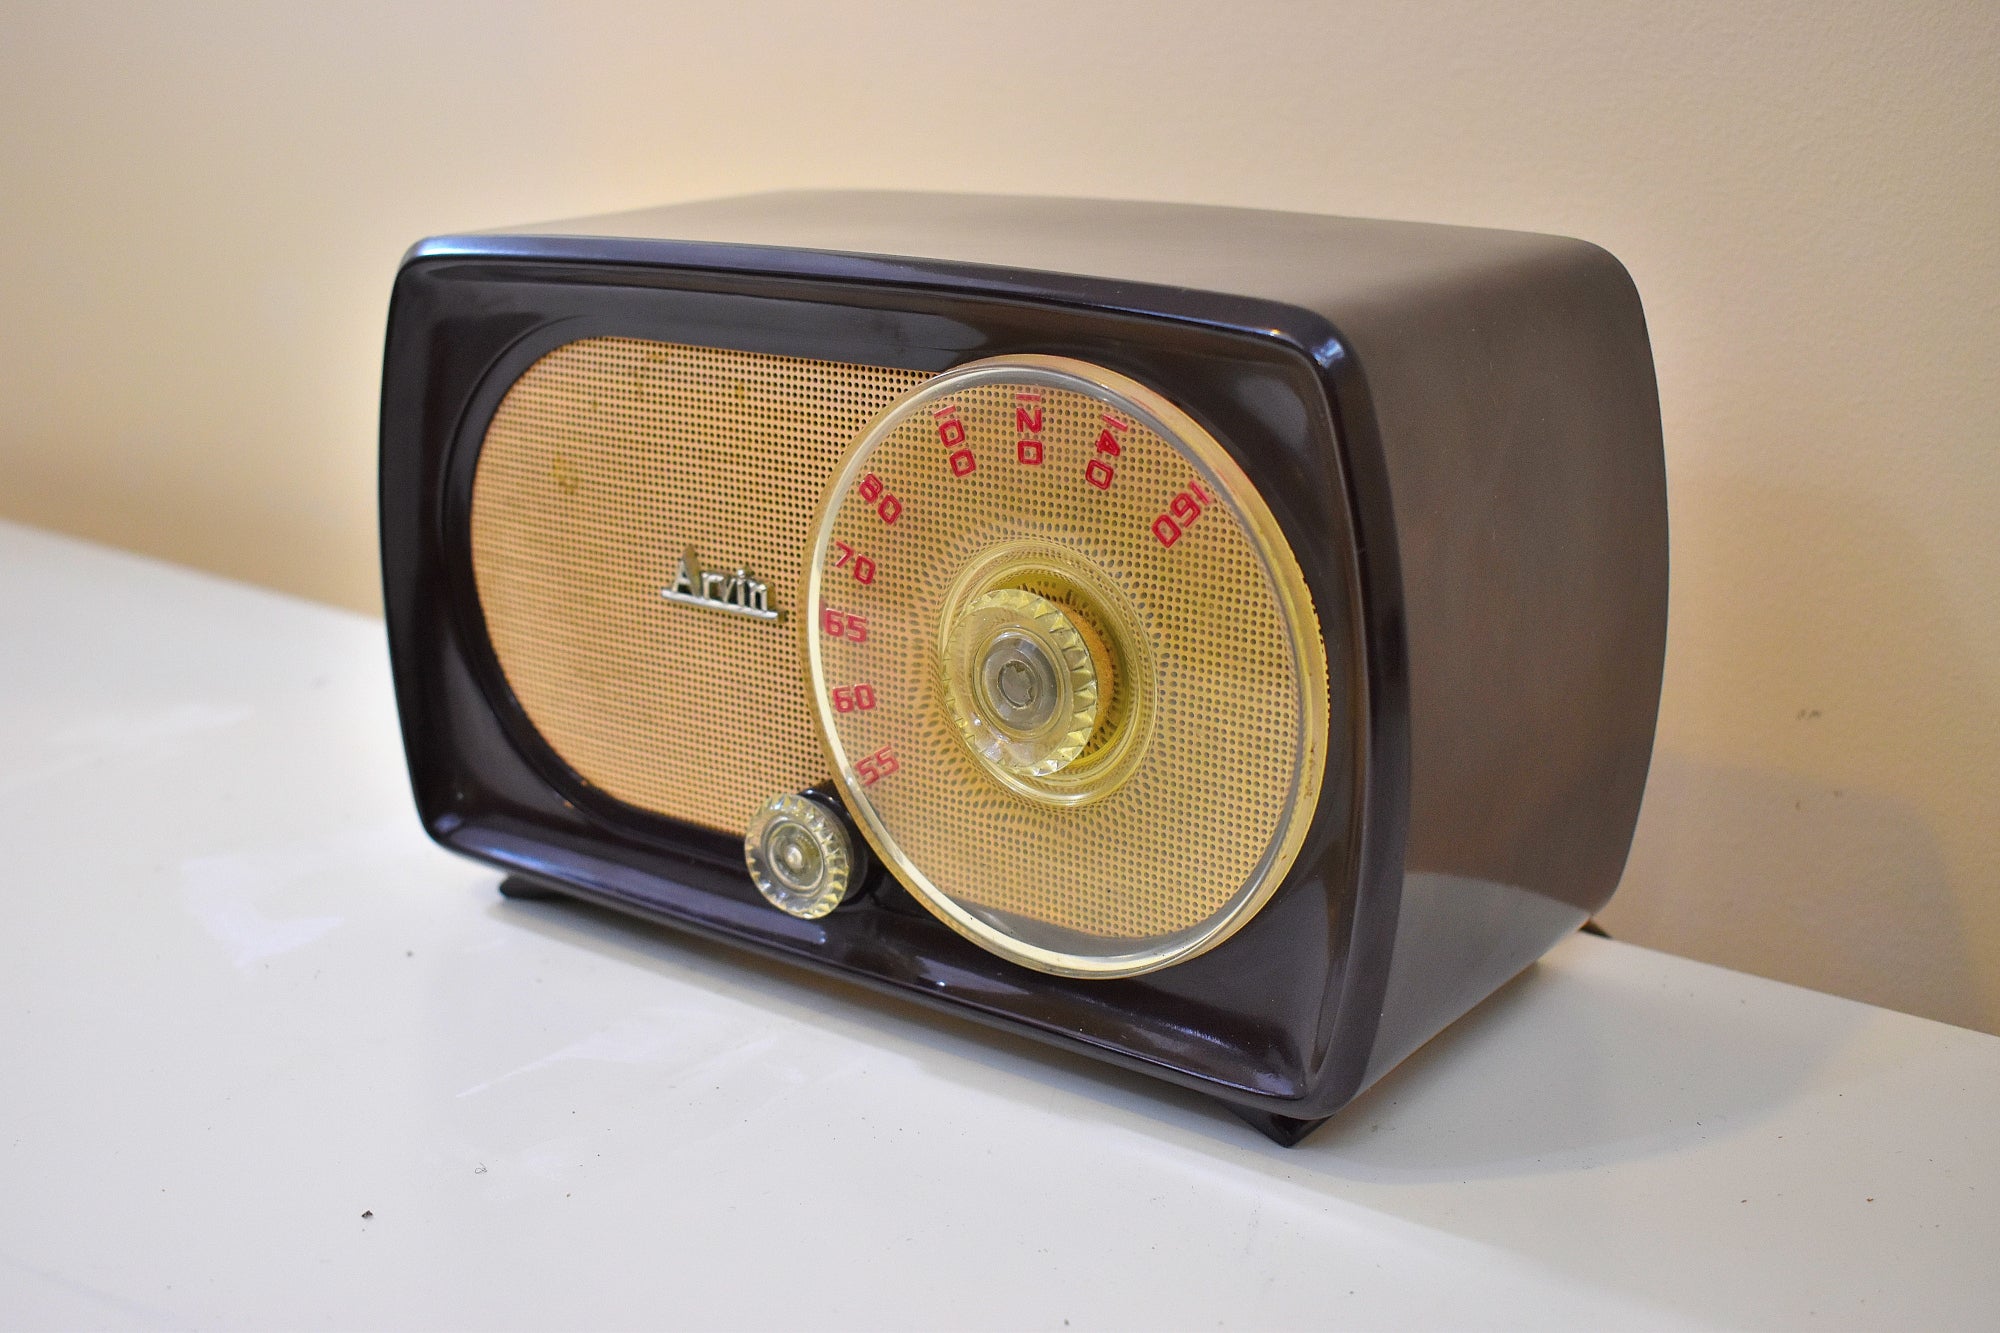 Siena Brown Bakelite 1955 Arvin Model 856T Vacuum Tube AM Radio Outstanding Condition and Sounds Like A Champ!